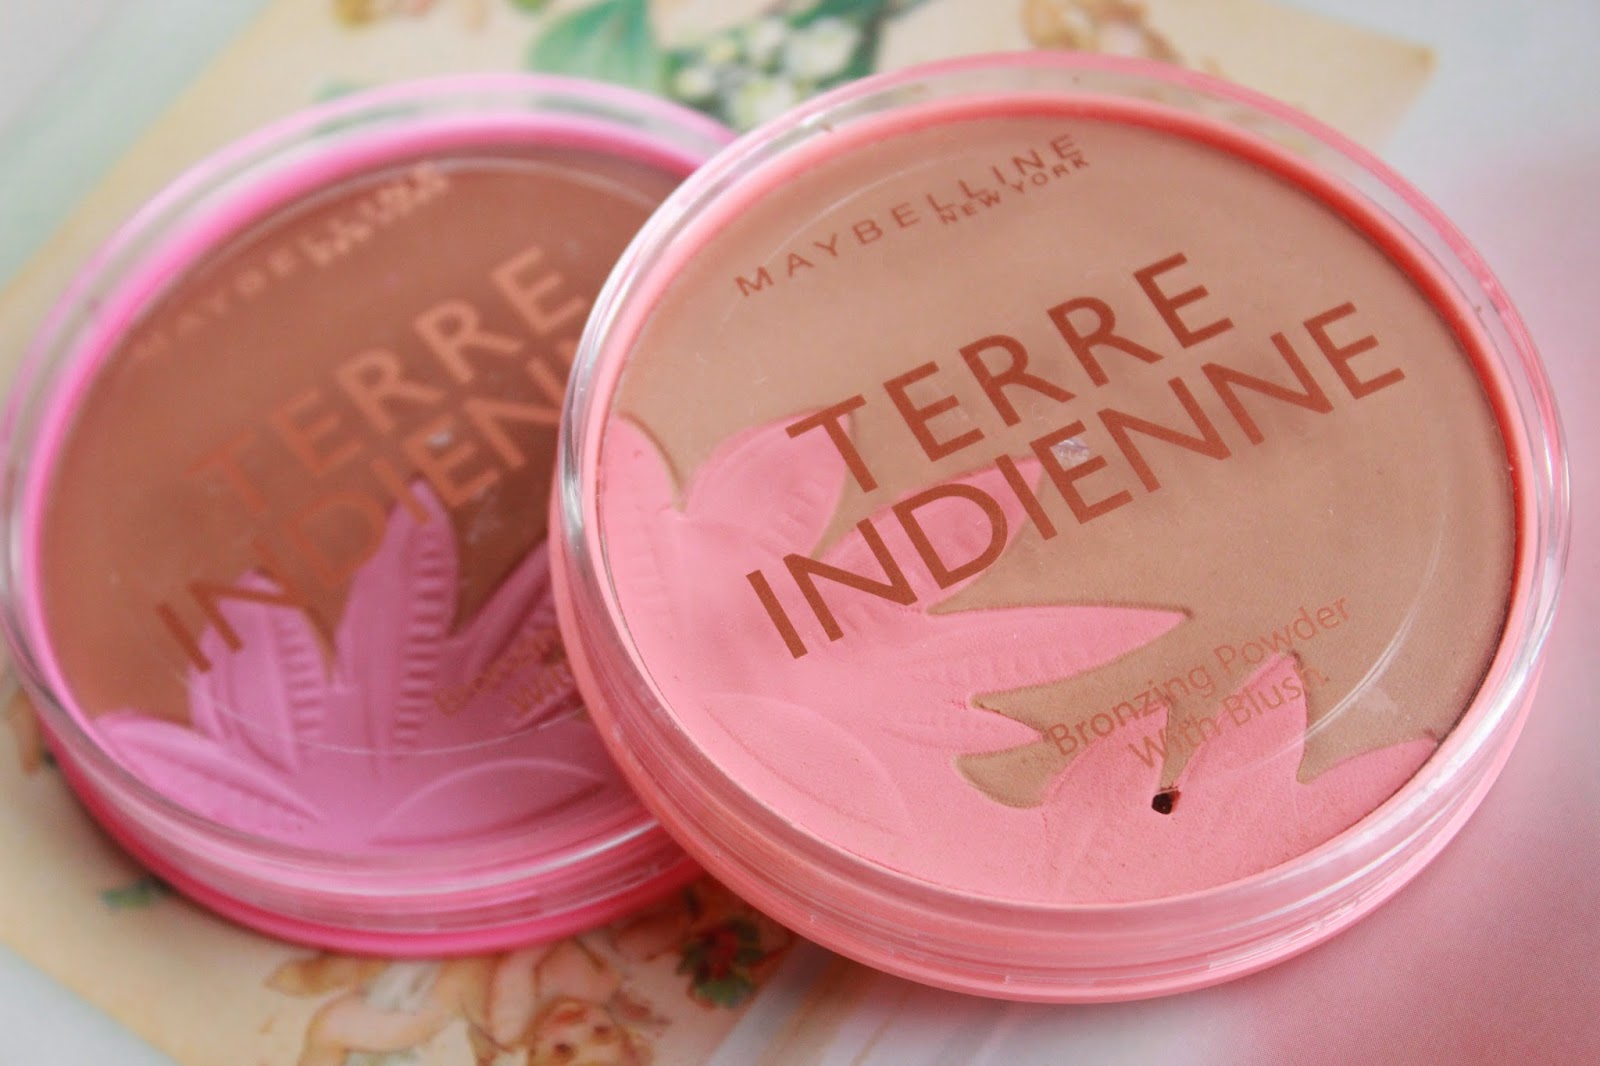 review swatches maybelline terre indienne poeders bronzed paradise golden tropics